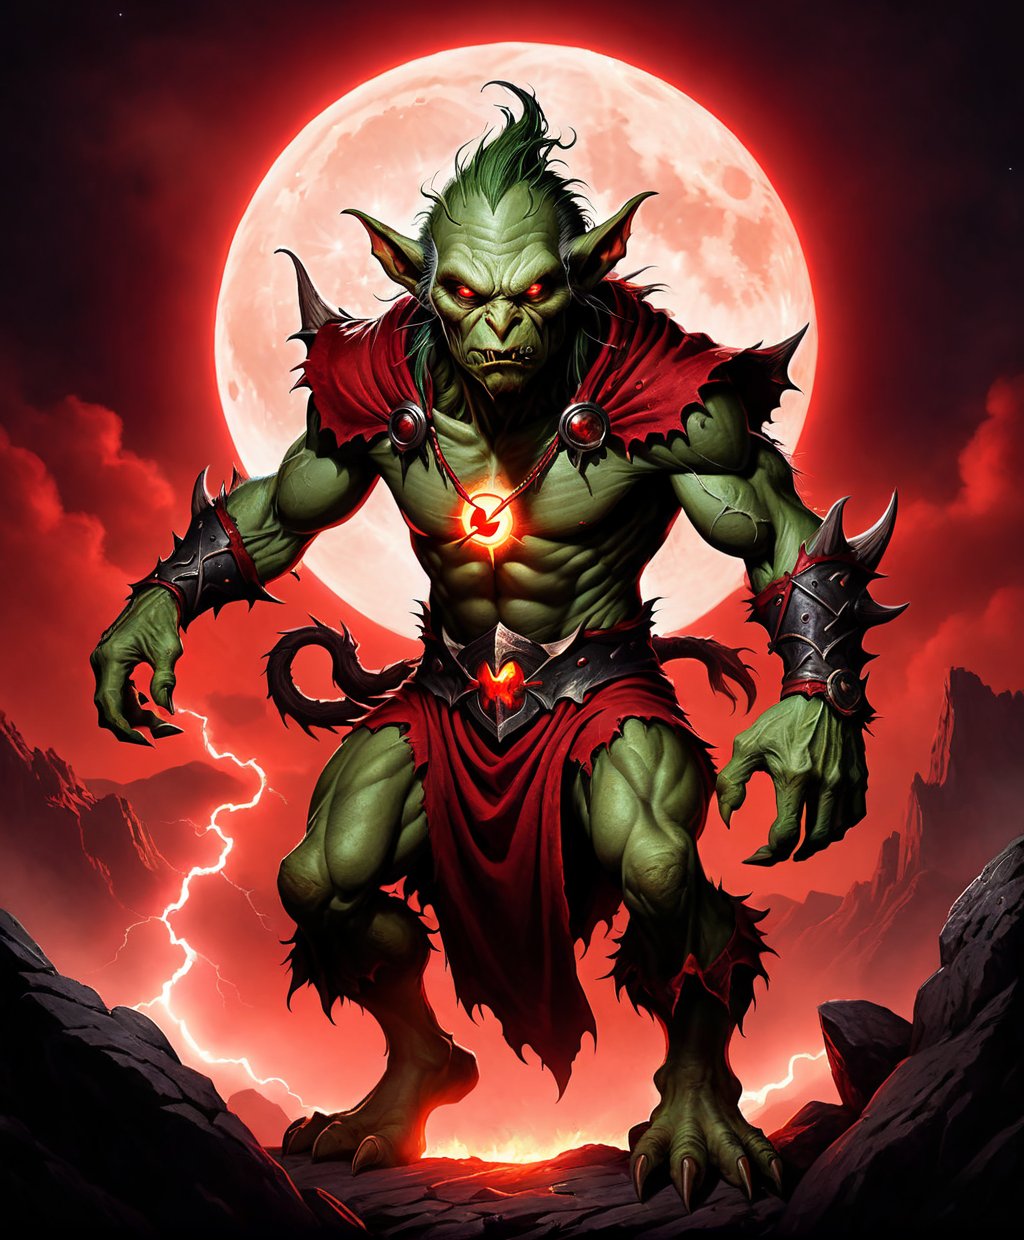 (Raw Photo:1.3) of (Ultra detailed:1.3) <lora:hfFEST:1.0>, (monster) legendary green-skinned goblin with red glowing eyes and red tattered robes in foreground, red moon with red lightning background scene, realistic dark fantasy art,Highly Detailed